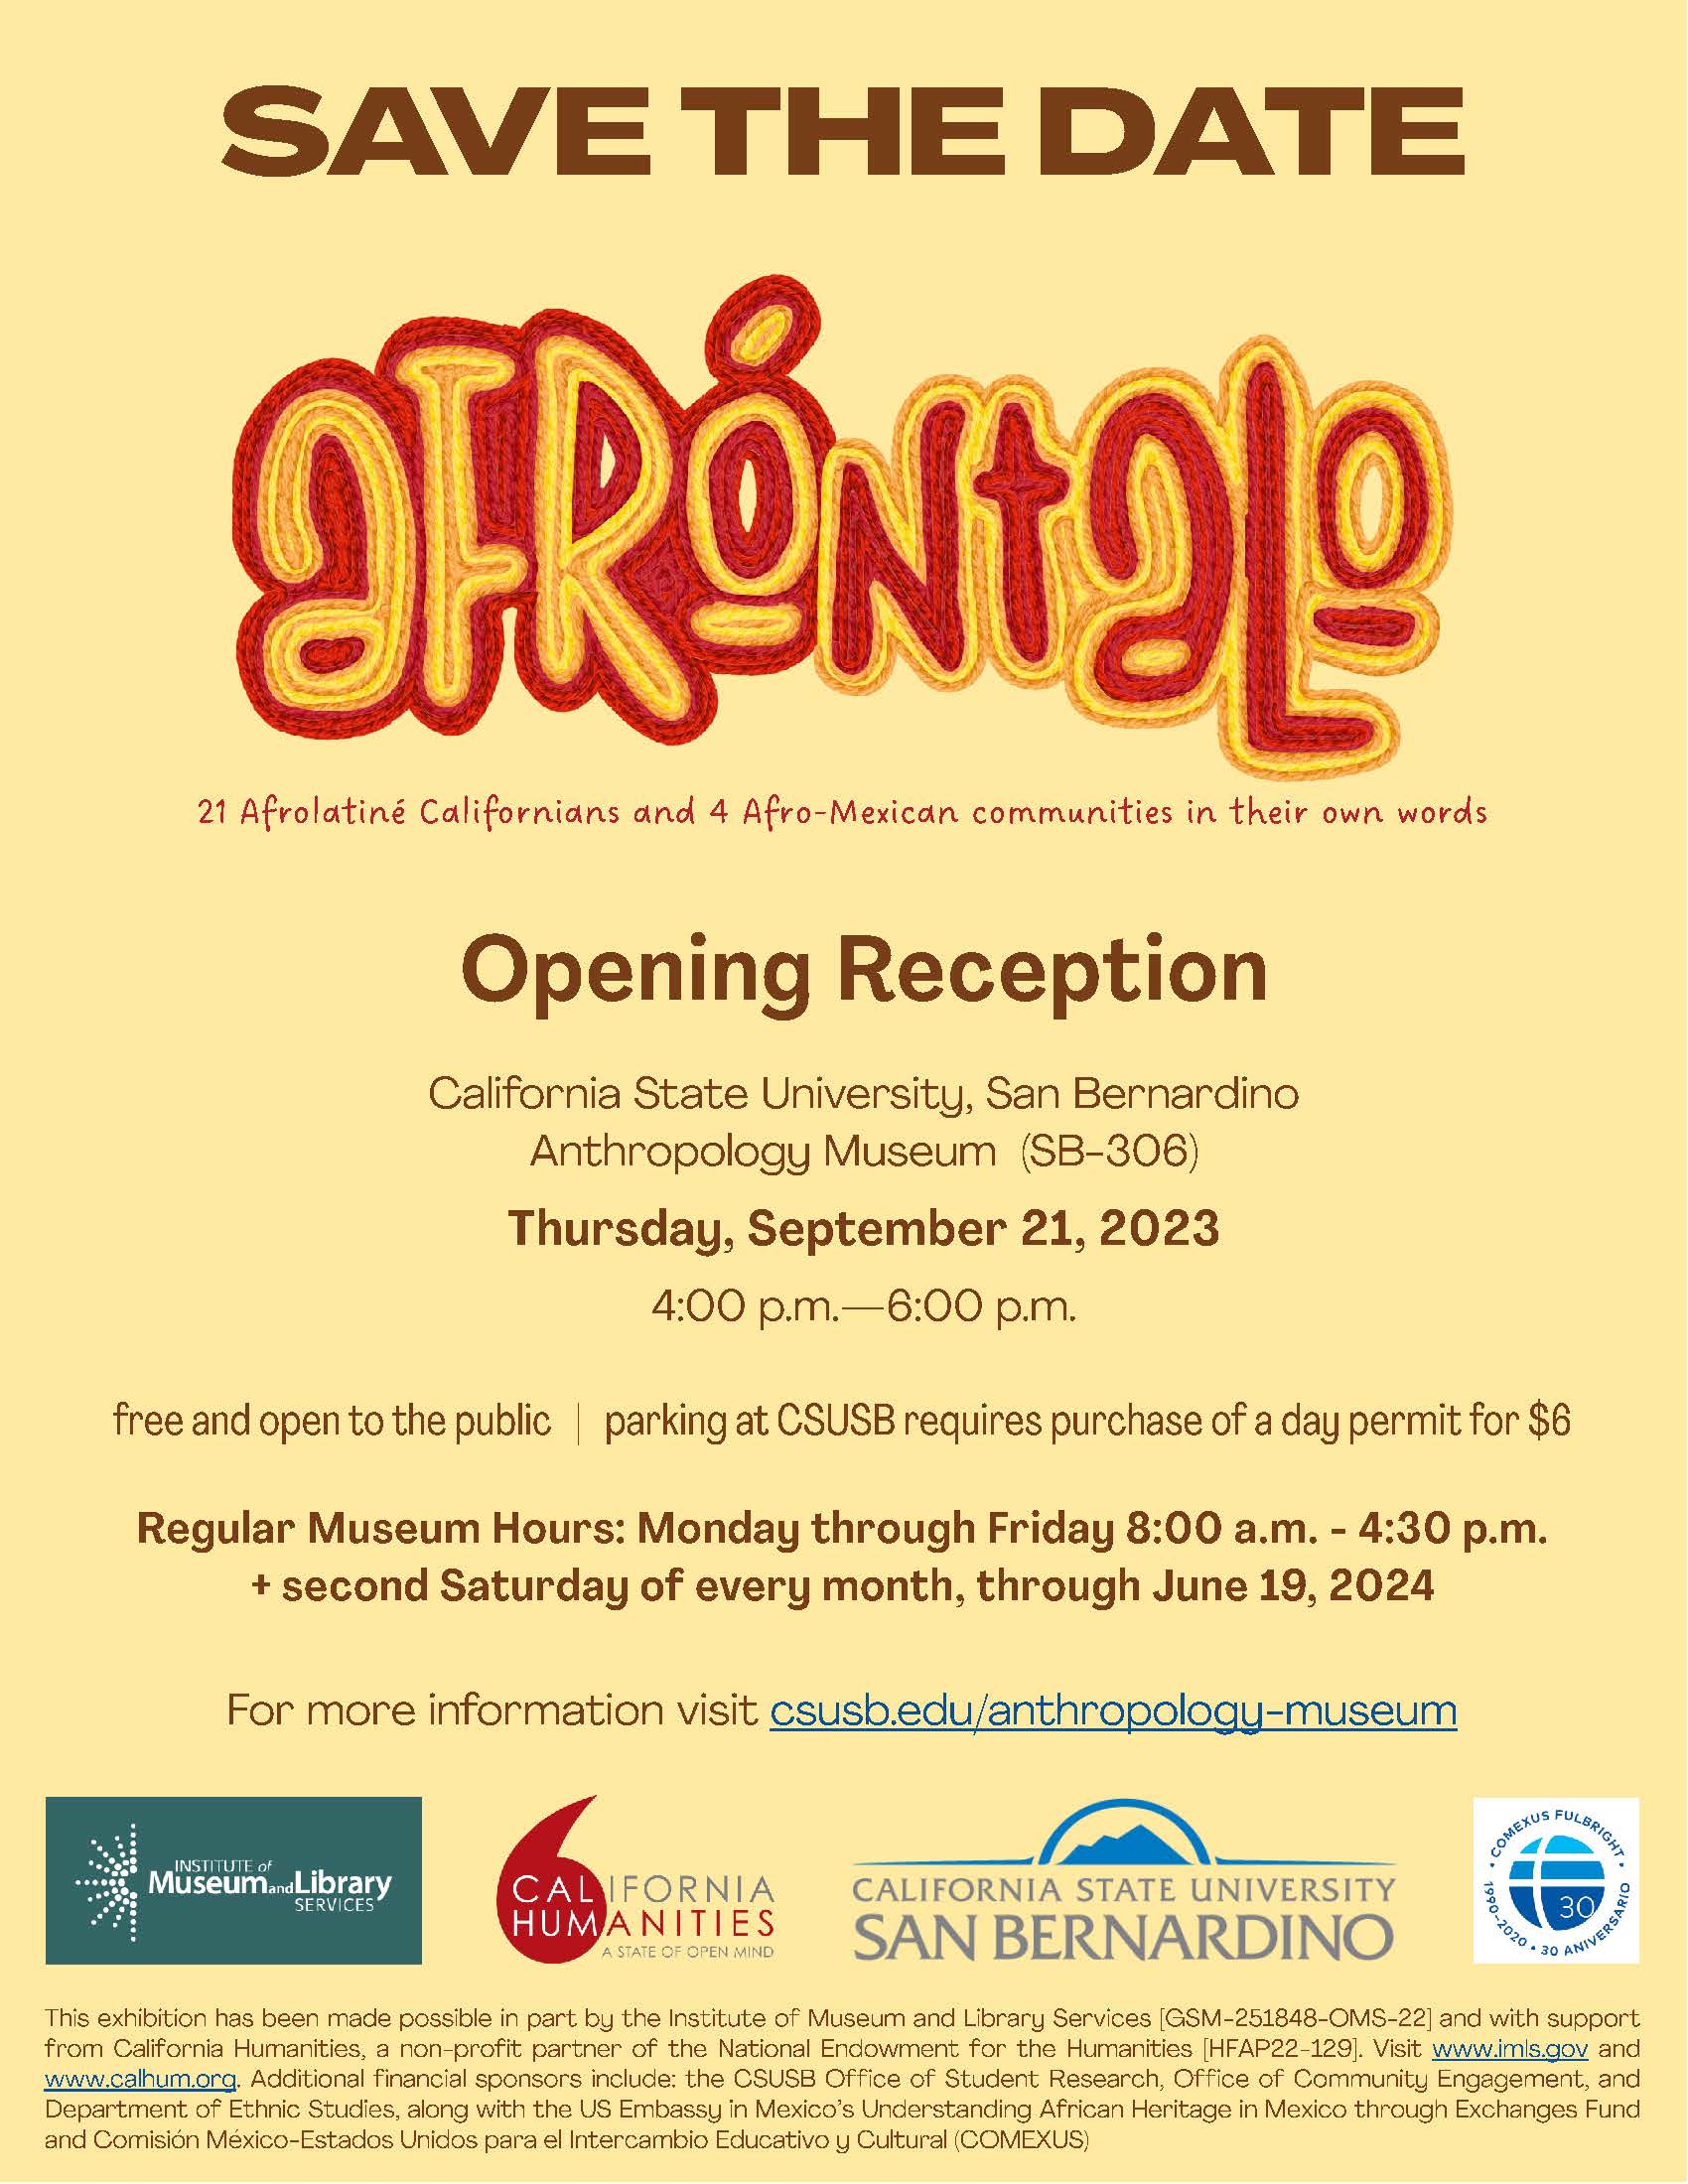 Poster promoting opening reception of Afróntalo exhibition, with sponsor logos including California Humanities